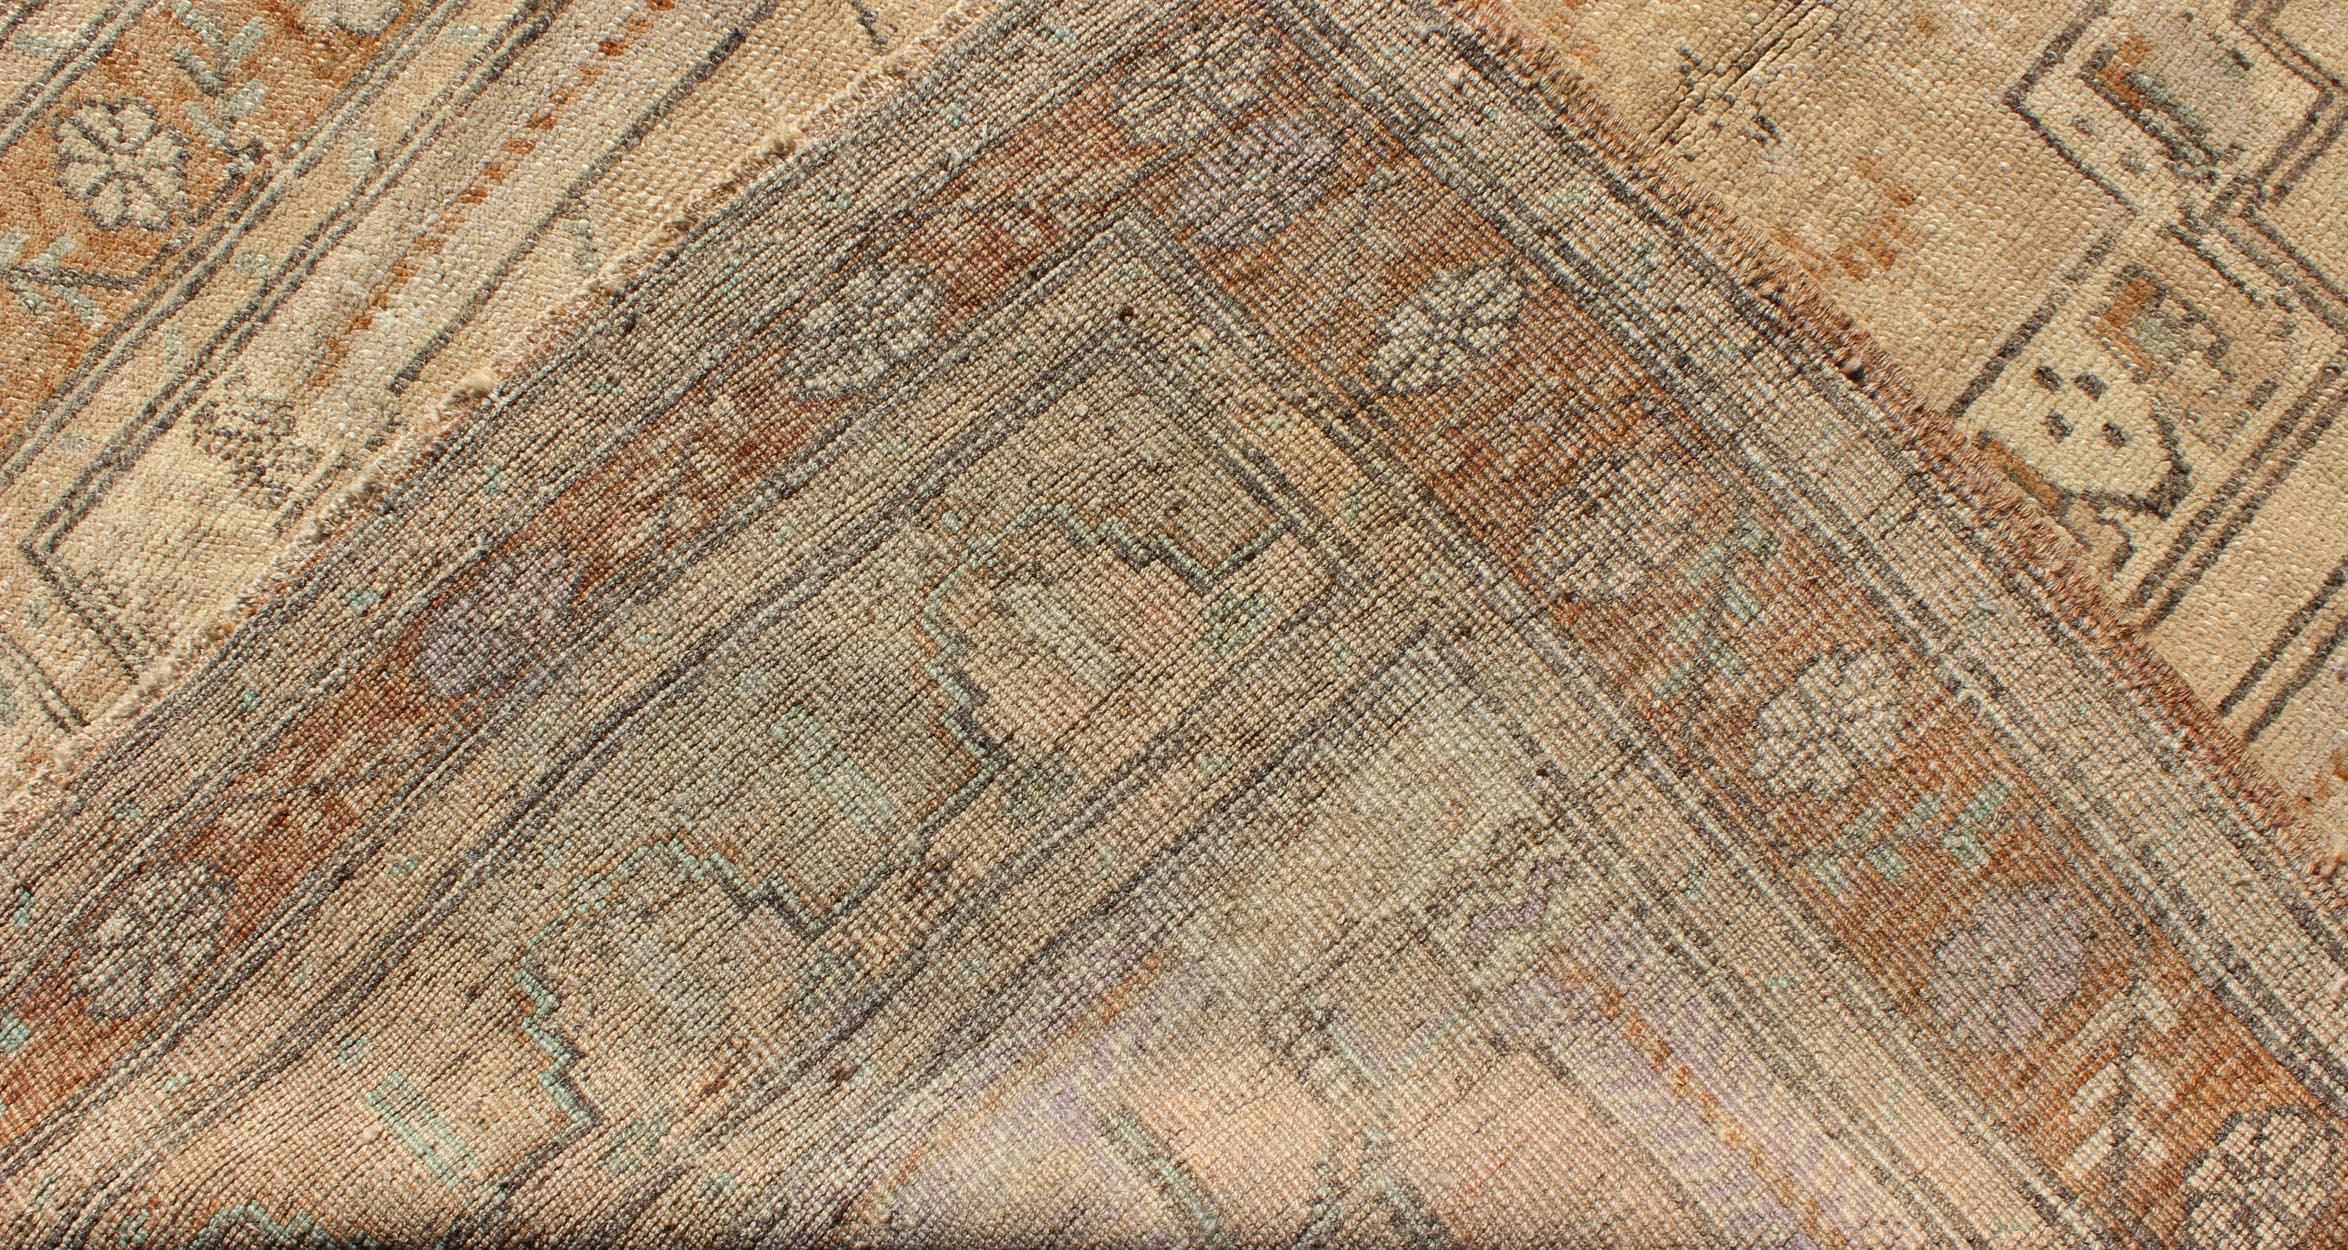 Wool Vintage Turkish Oushak Rug with Medallion Design in Camel, Taupe, Green & Brown For Sale